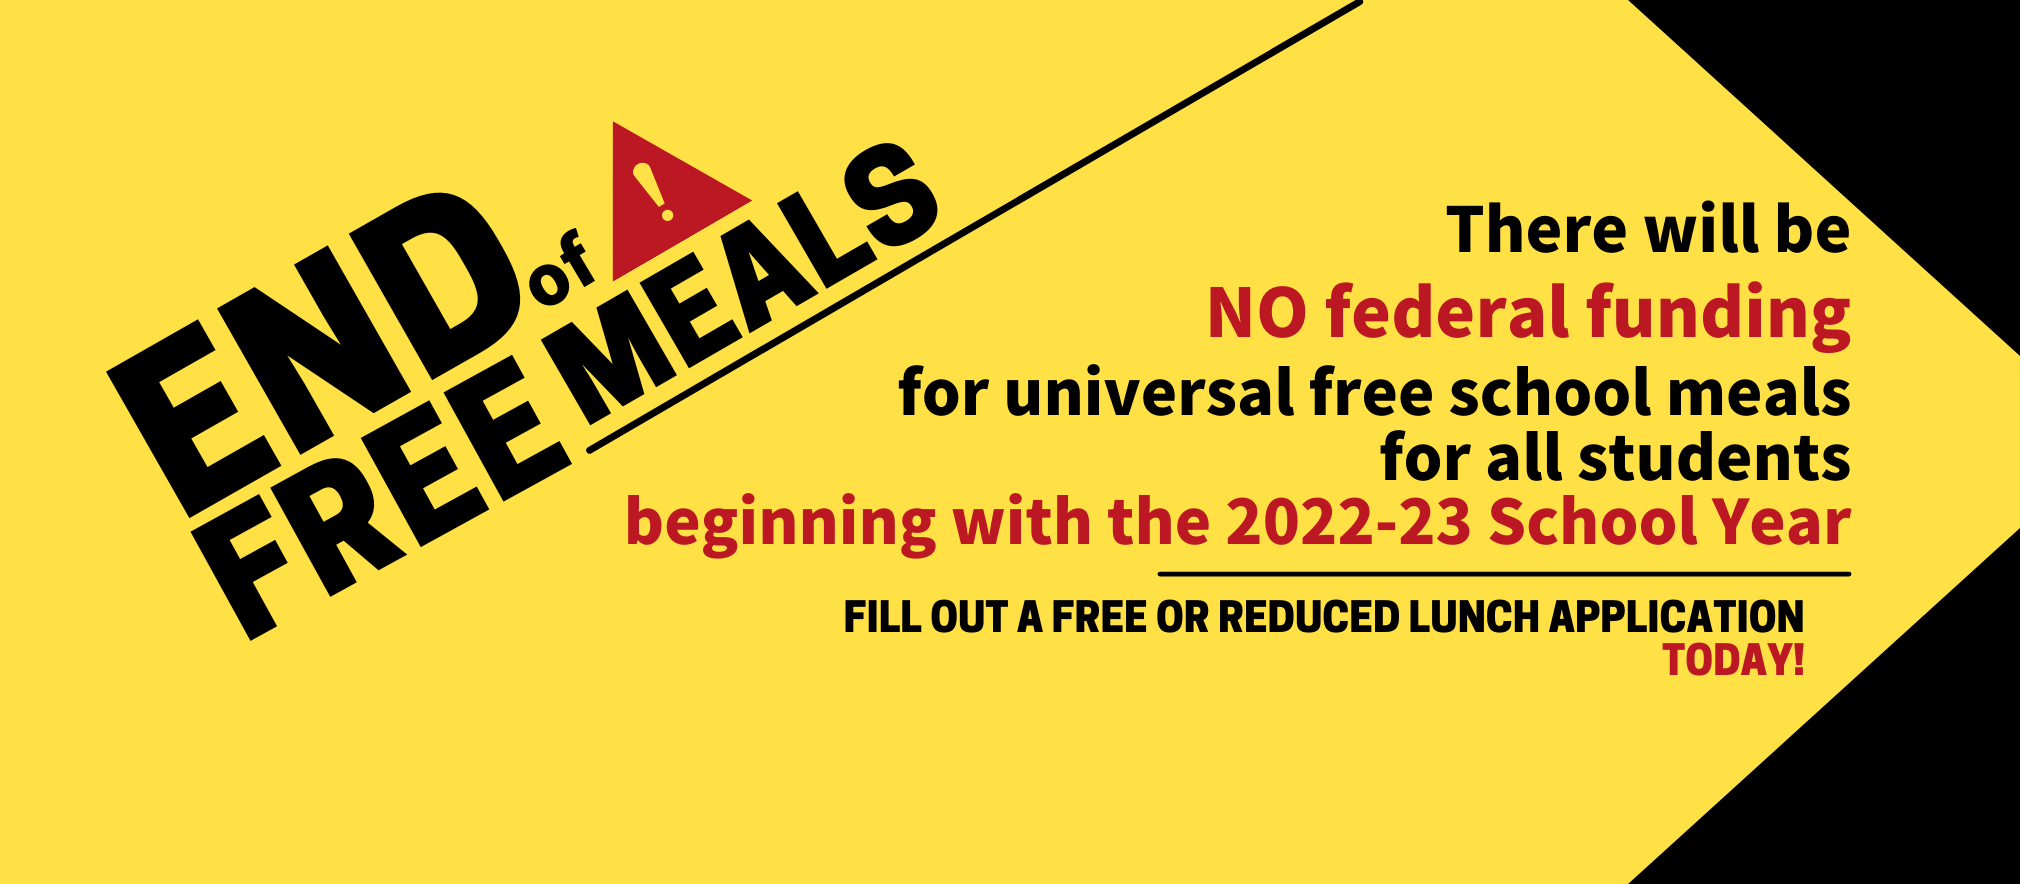 End of Free Meals